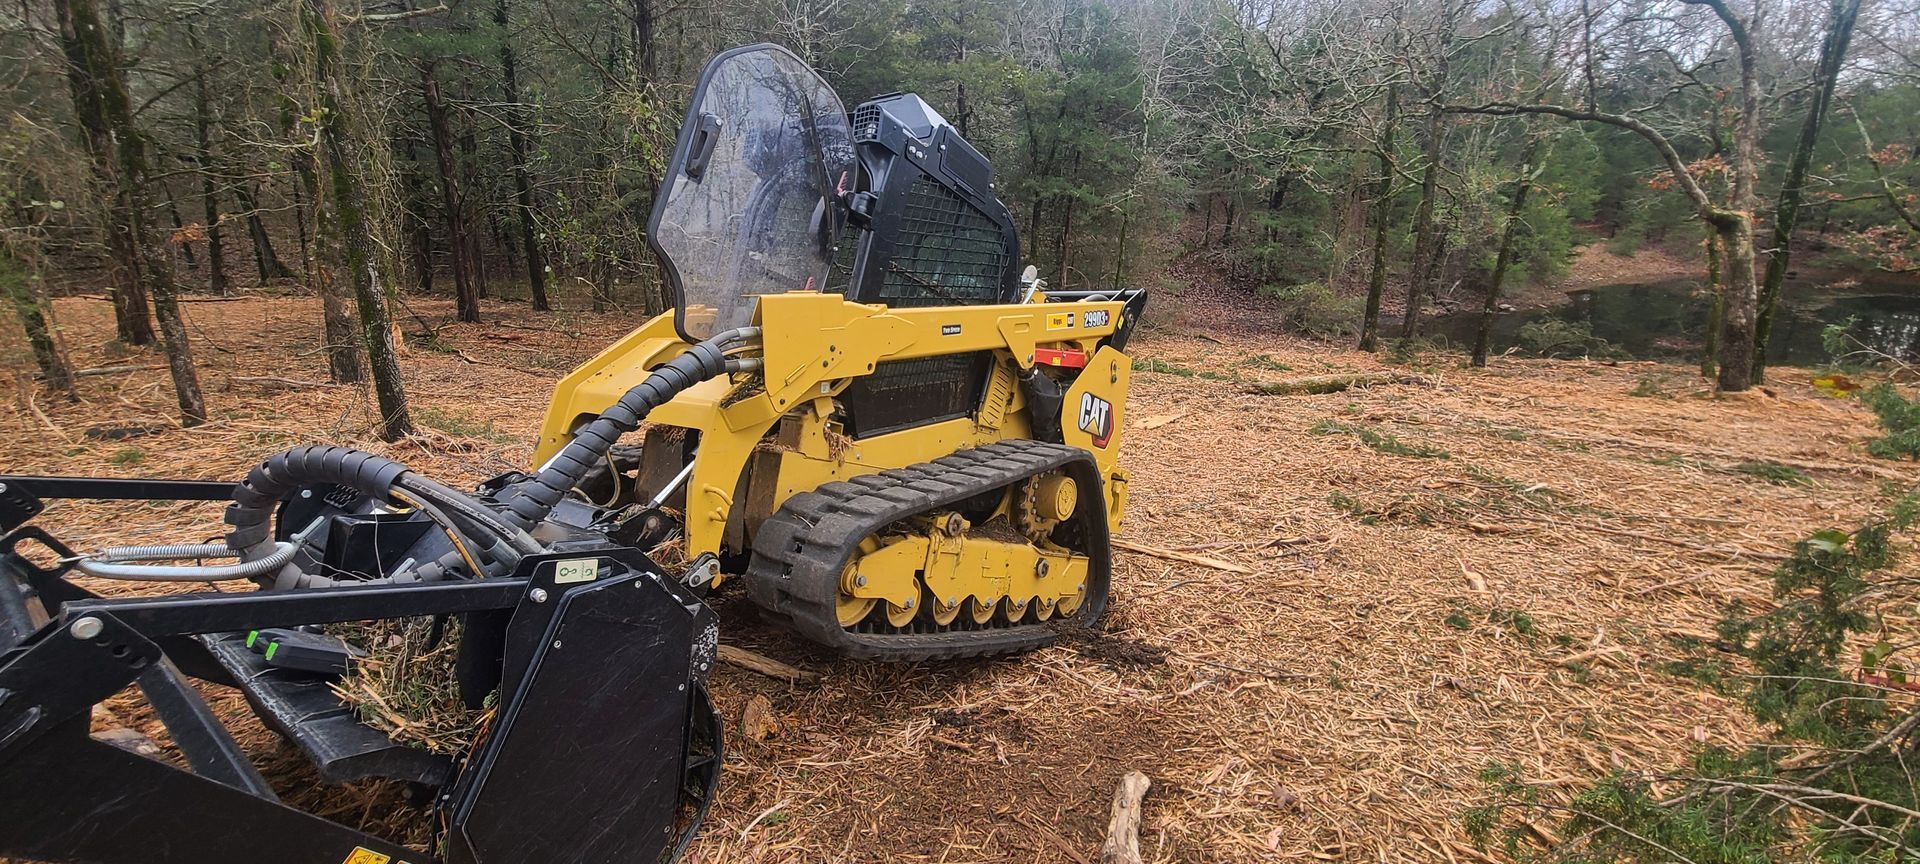 A yellow tractor is sitting in the middle of a forest.